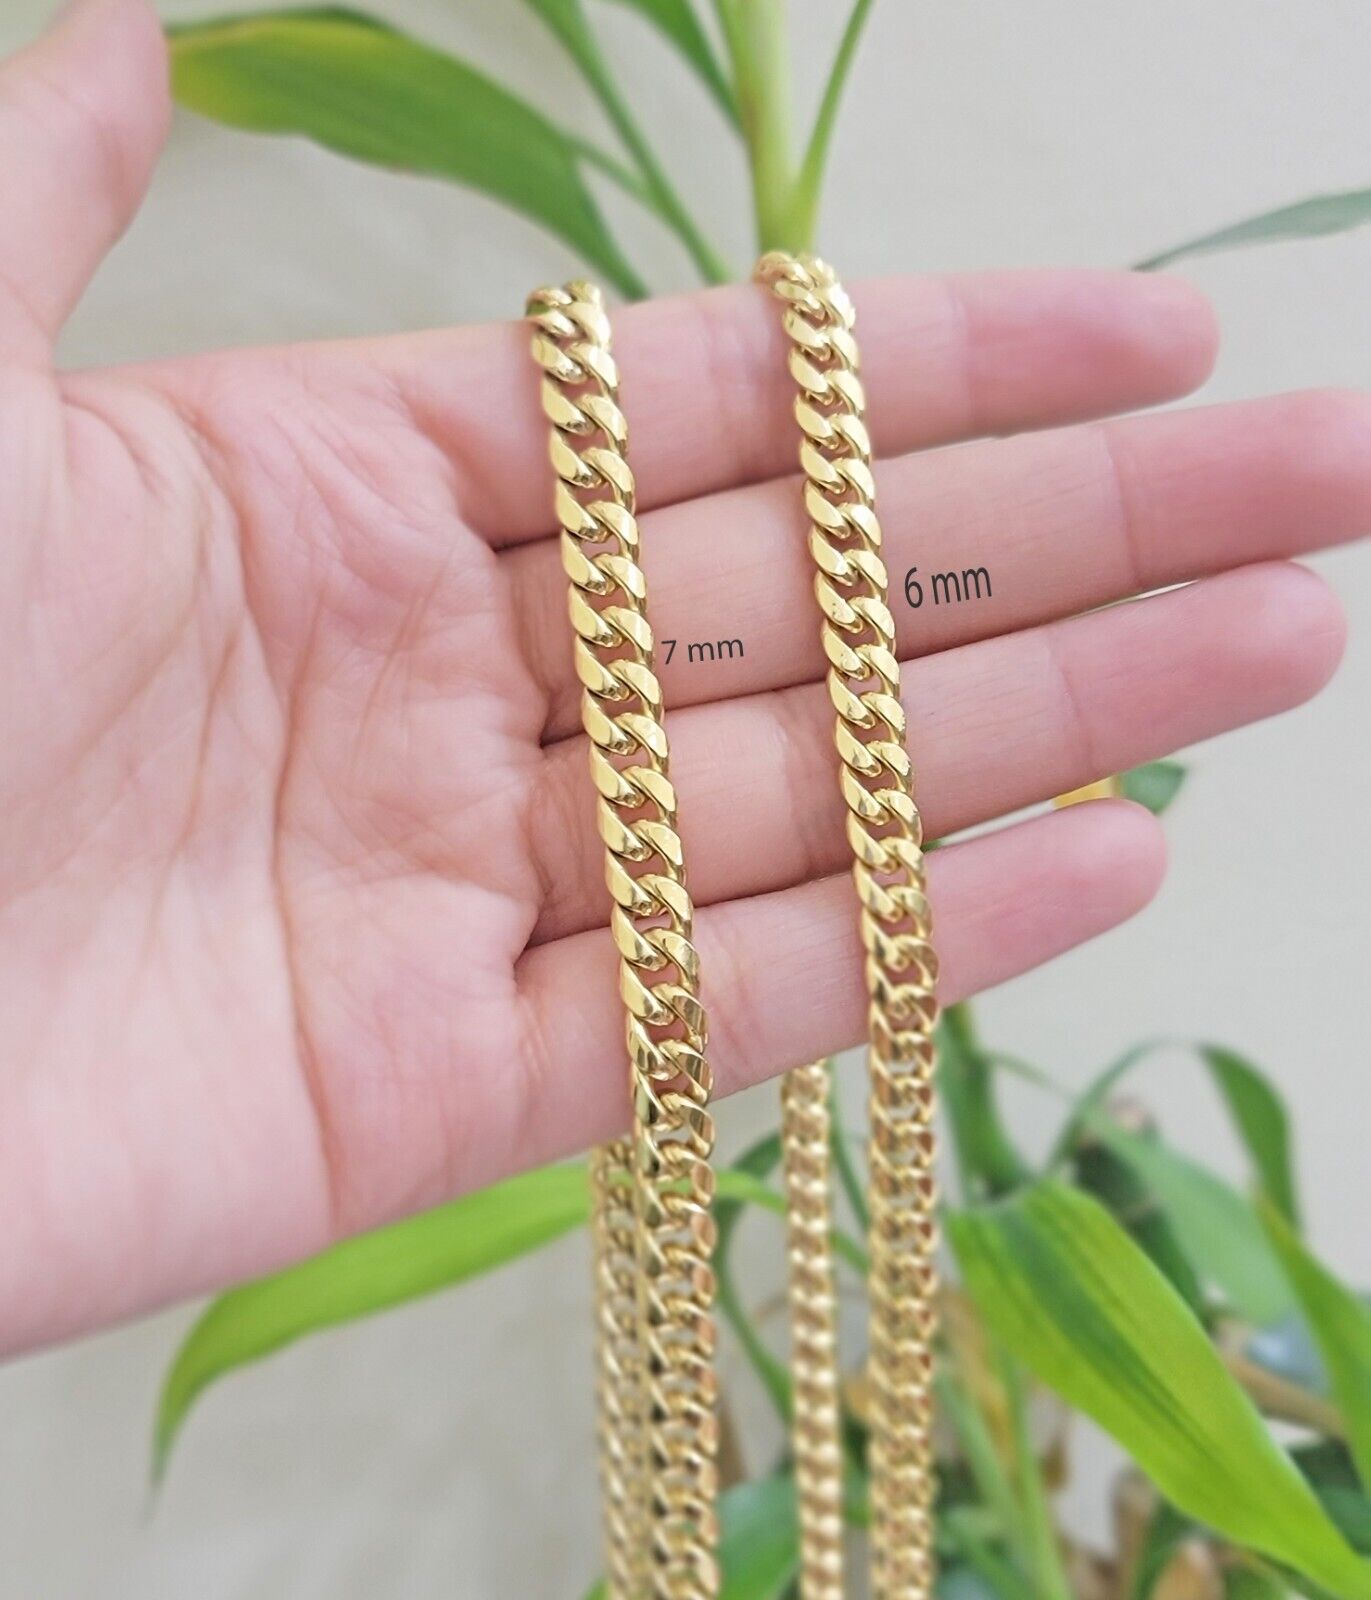 10k Gold Necklace 7mm 22 Inch Miami Cuban Link Chain REAL 10kt yellow Gold Men's